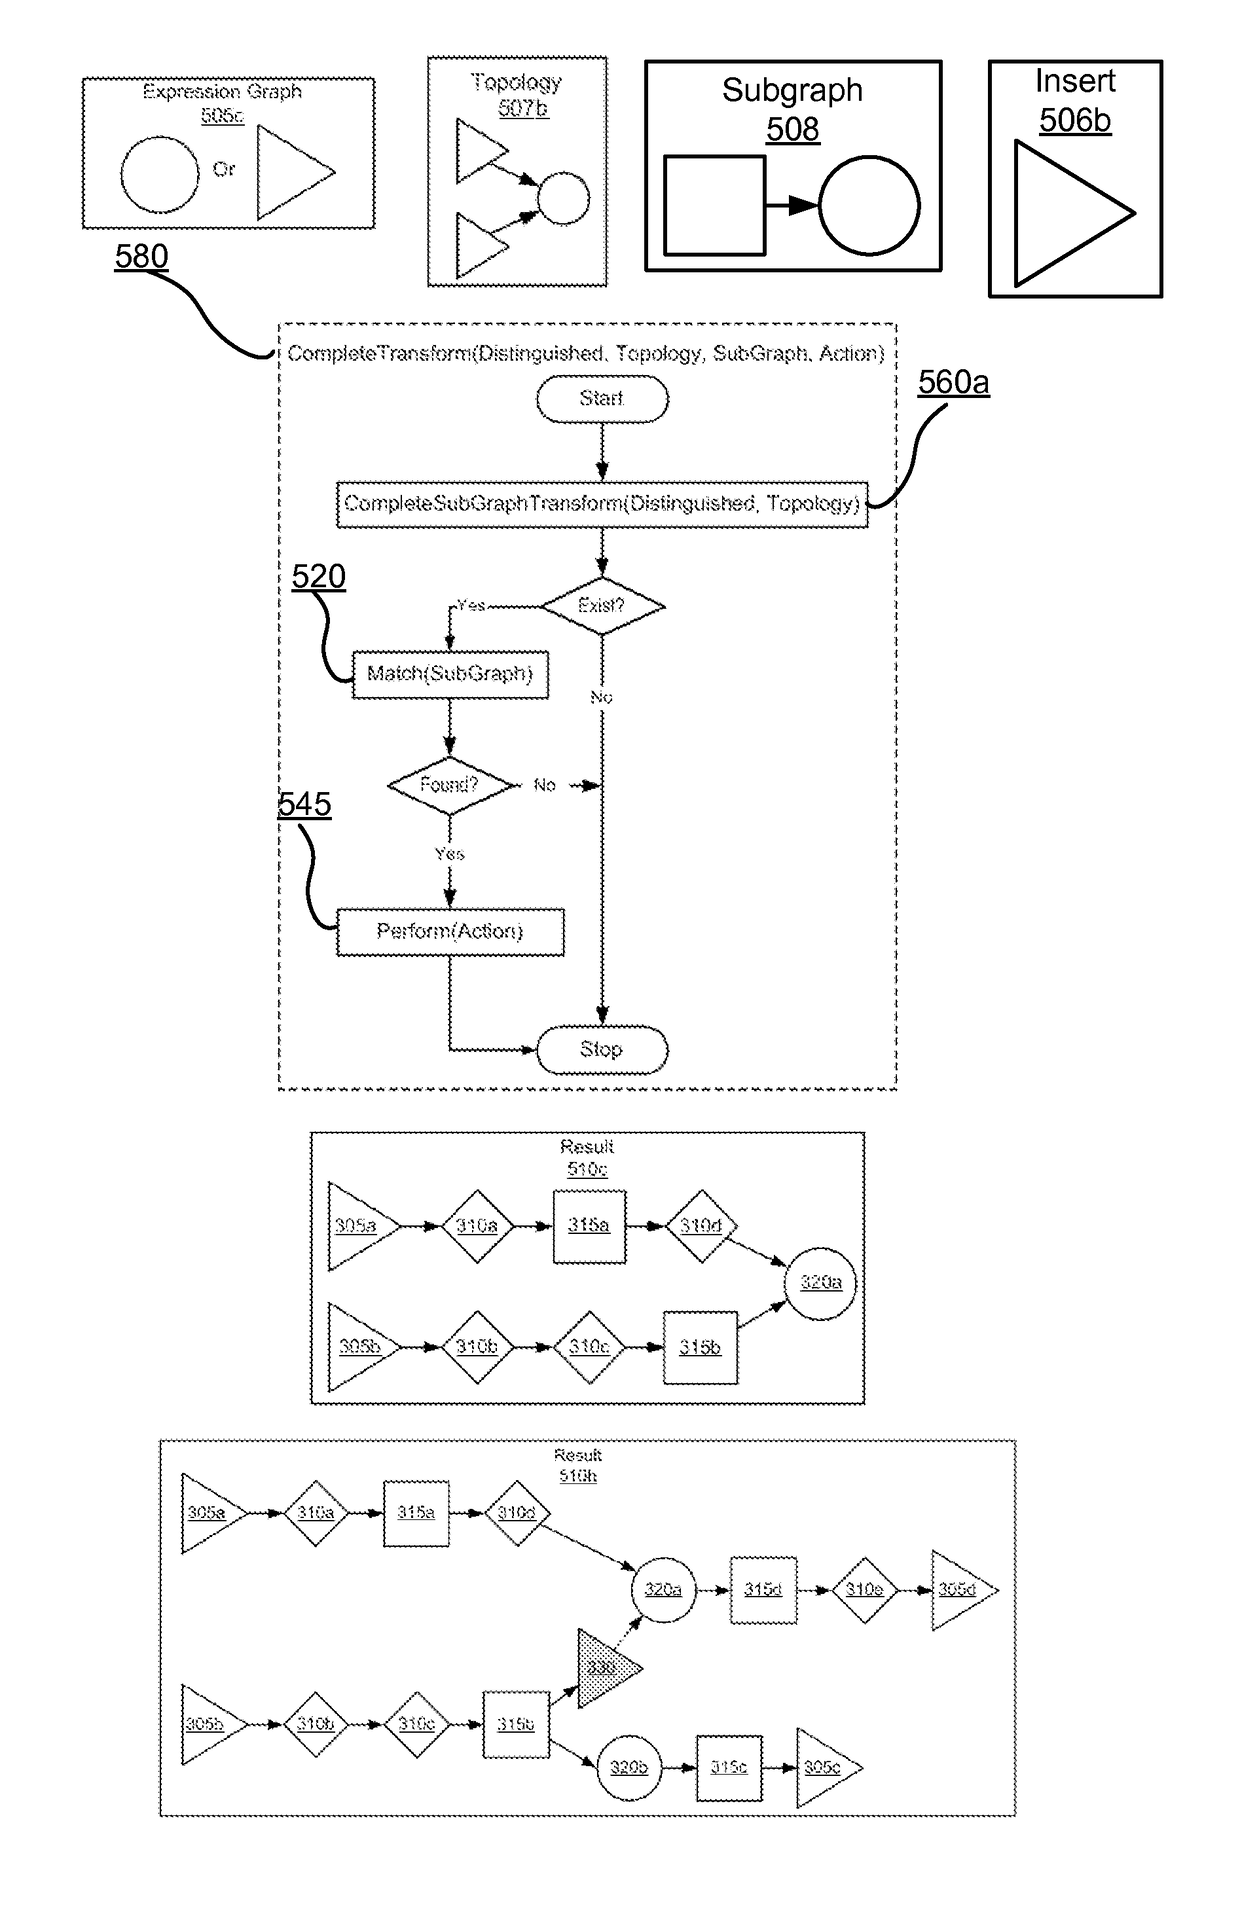 Logical data flow mapping rules for (sub) graph isomorphism in a cluster computing environment